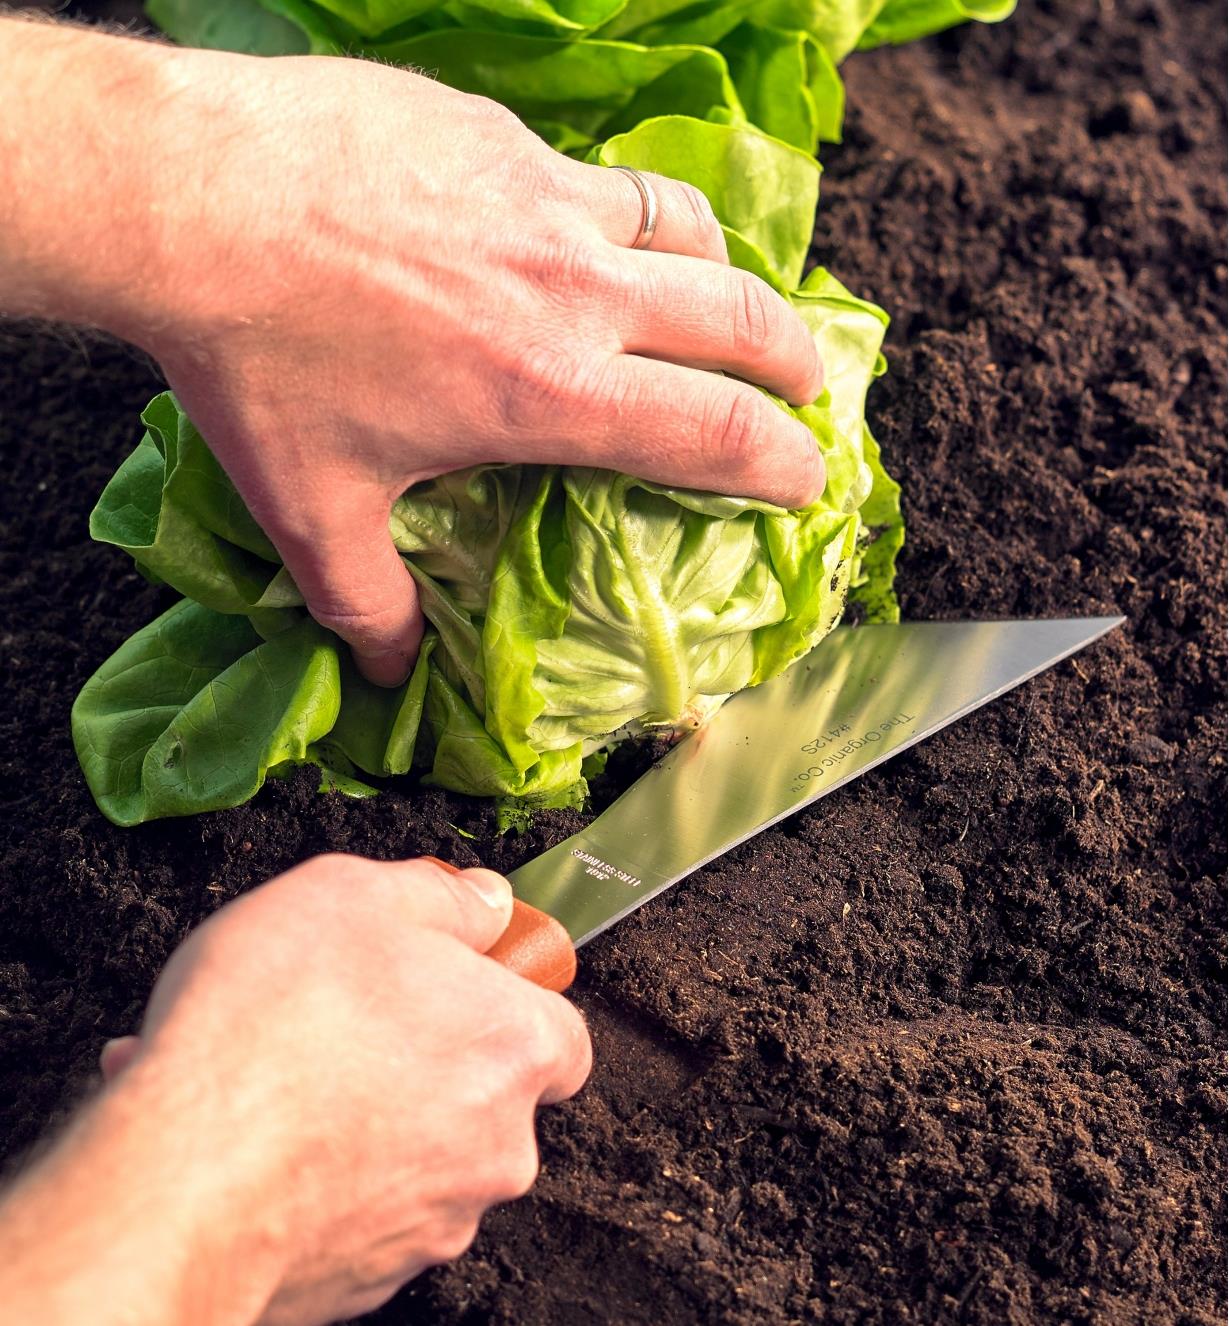 Using the harvest knife to cut a lettuce plant away from its roots